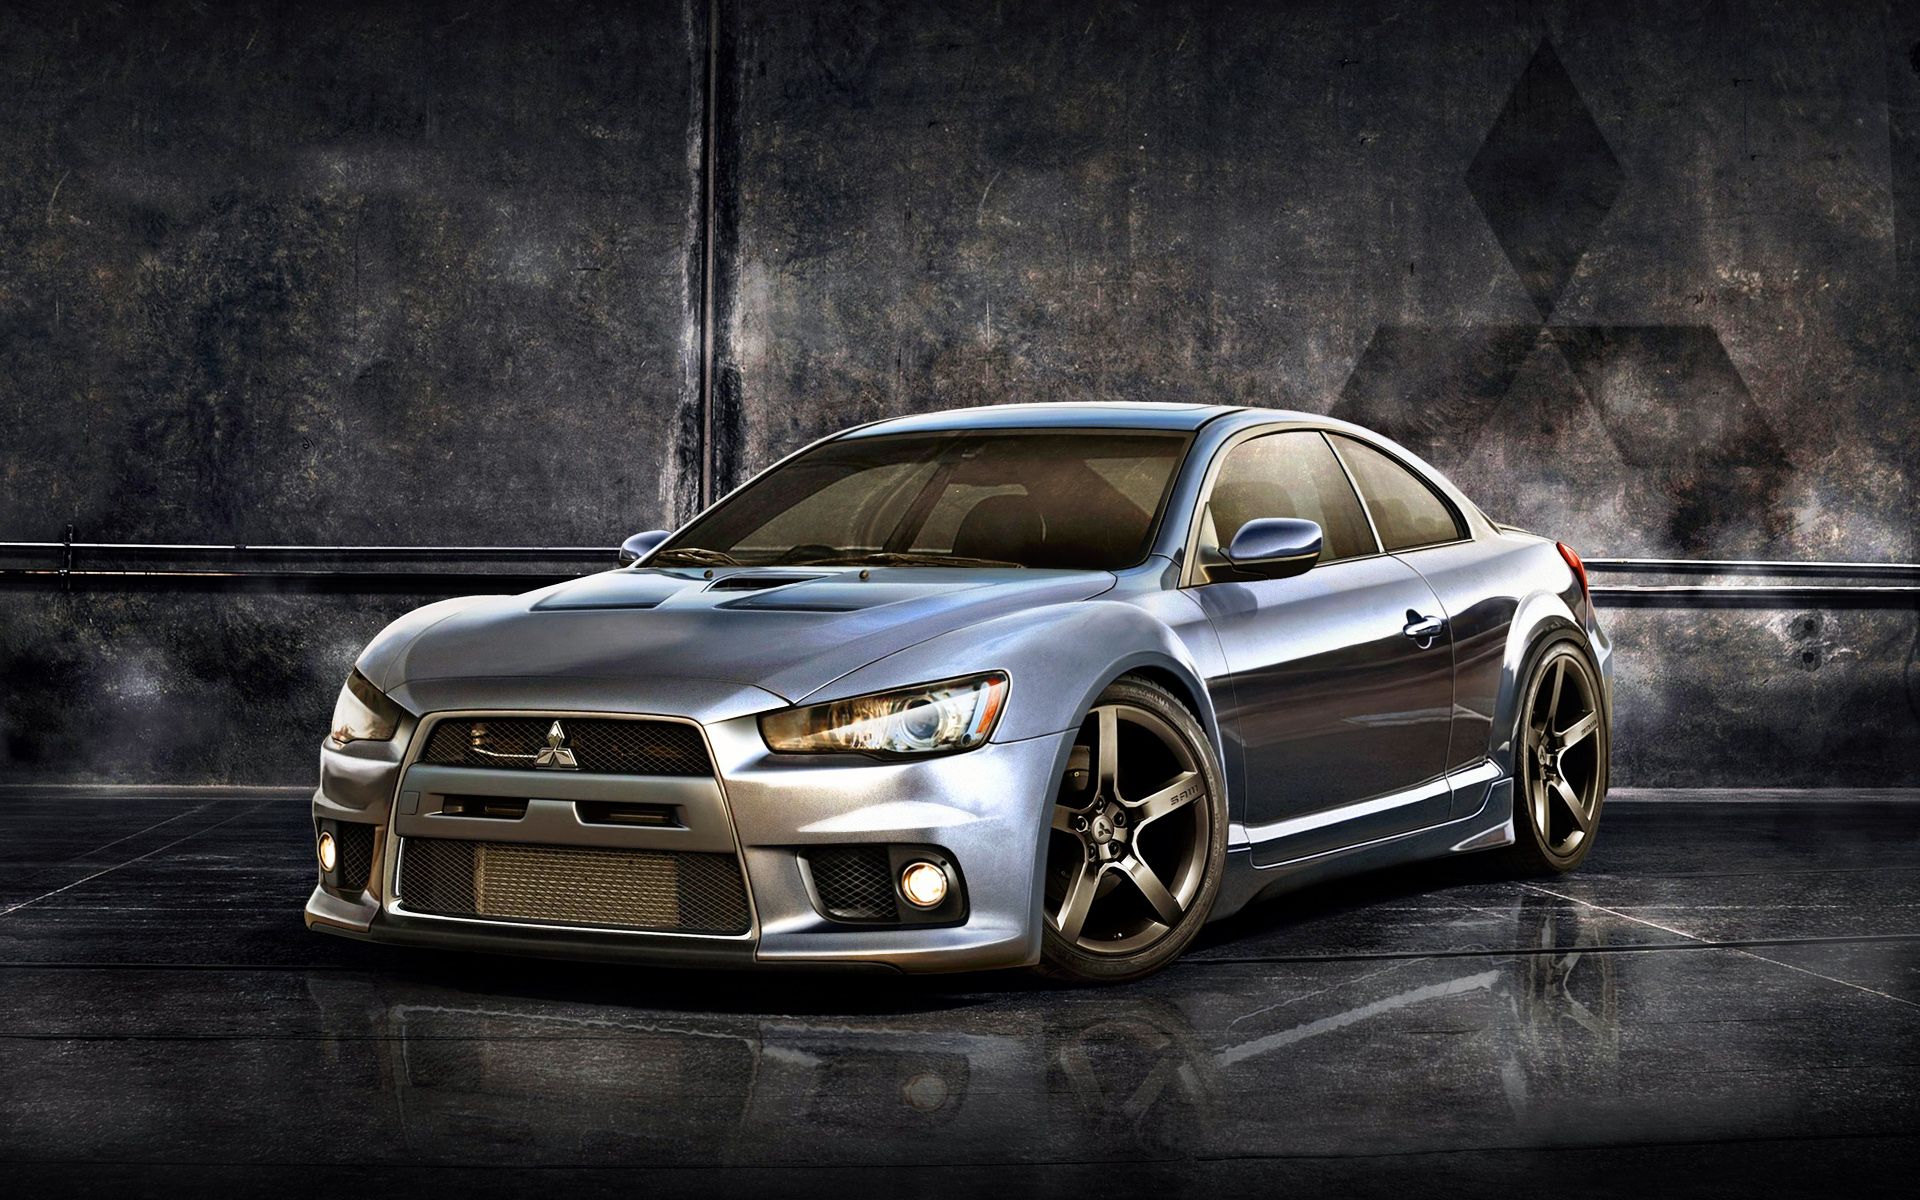 2017 Mitsubishi Lancer Performance Date Release Concept and other